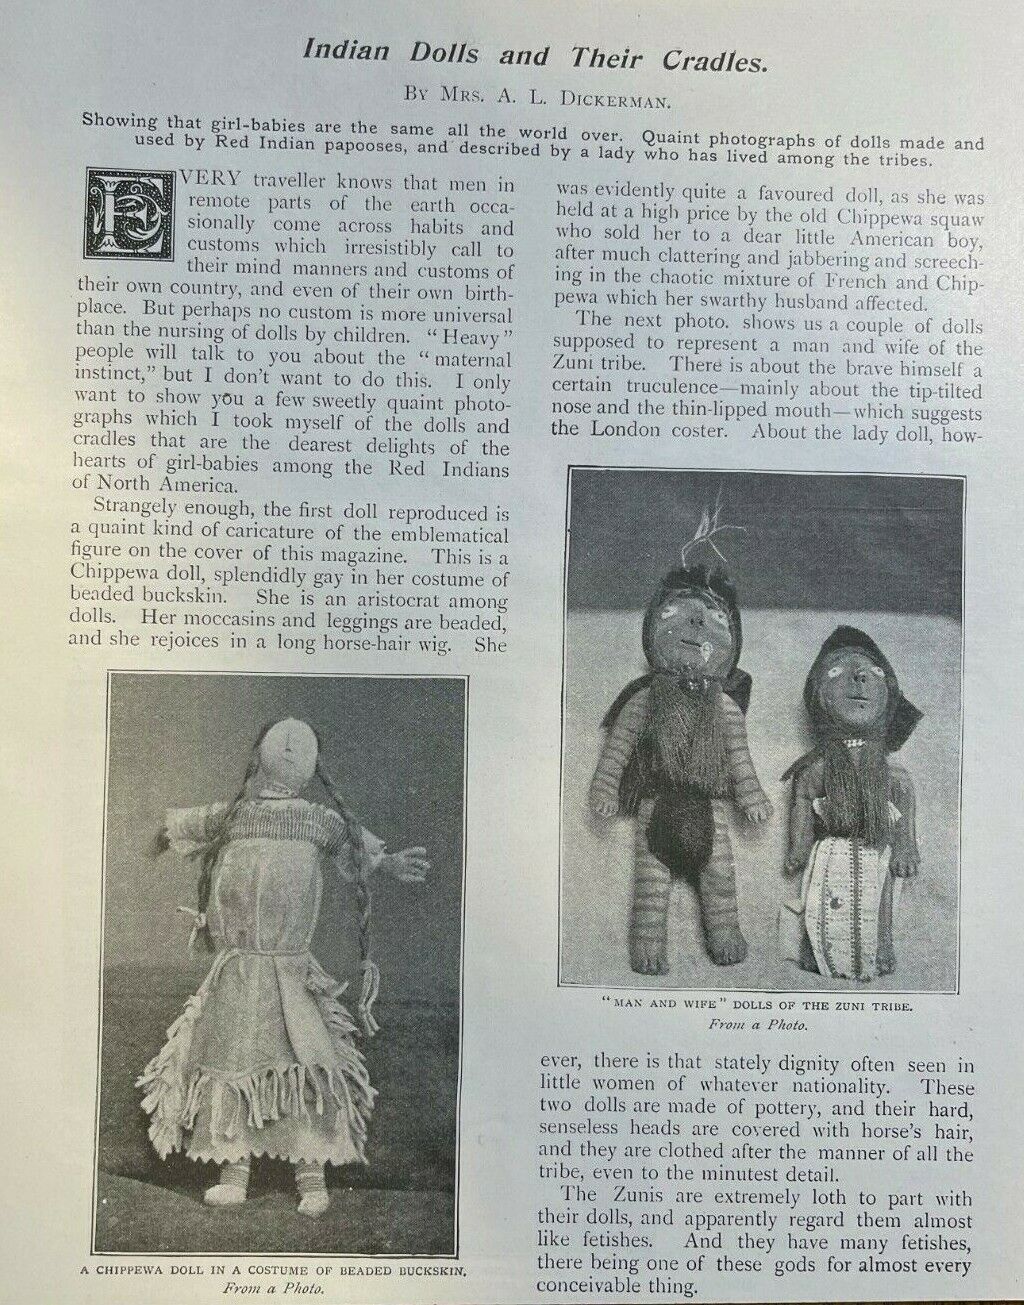 1898 American Indian Dolls and Their Cradles illustrated